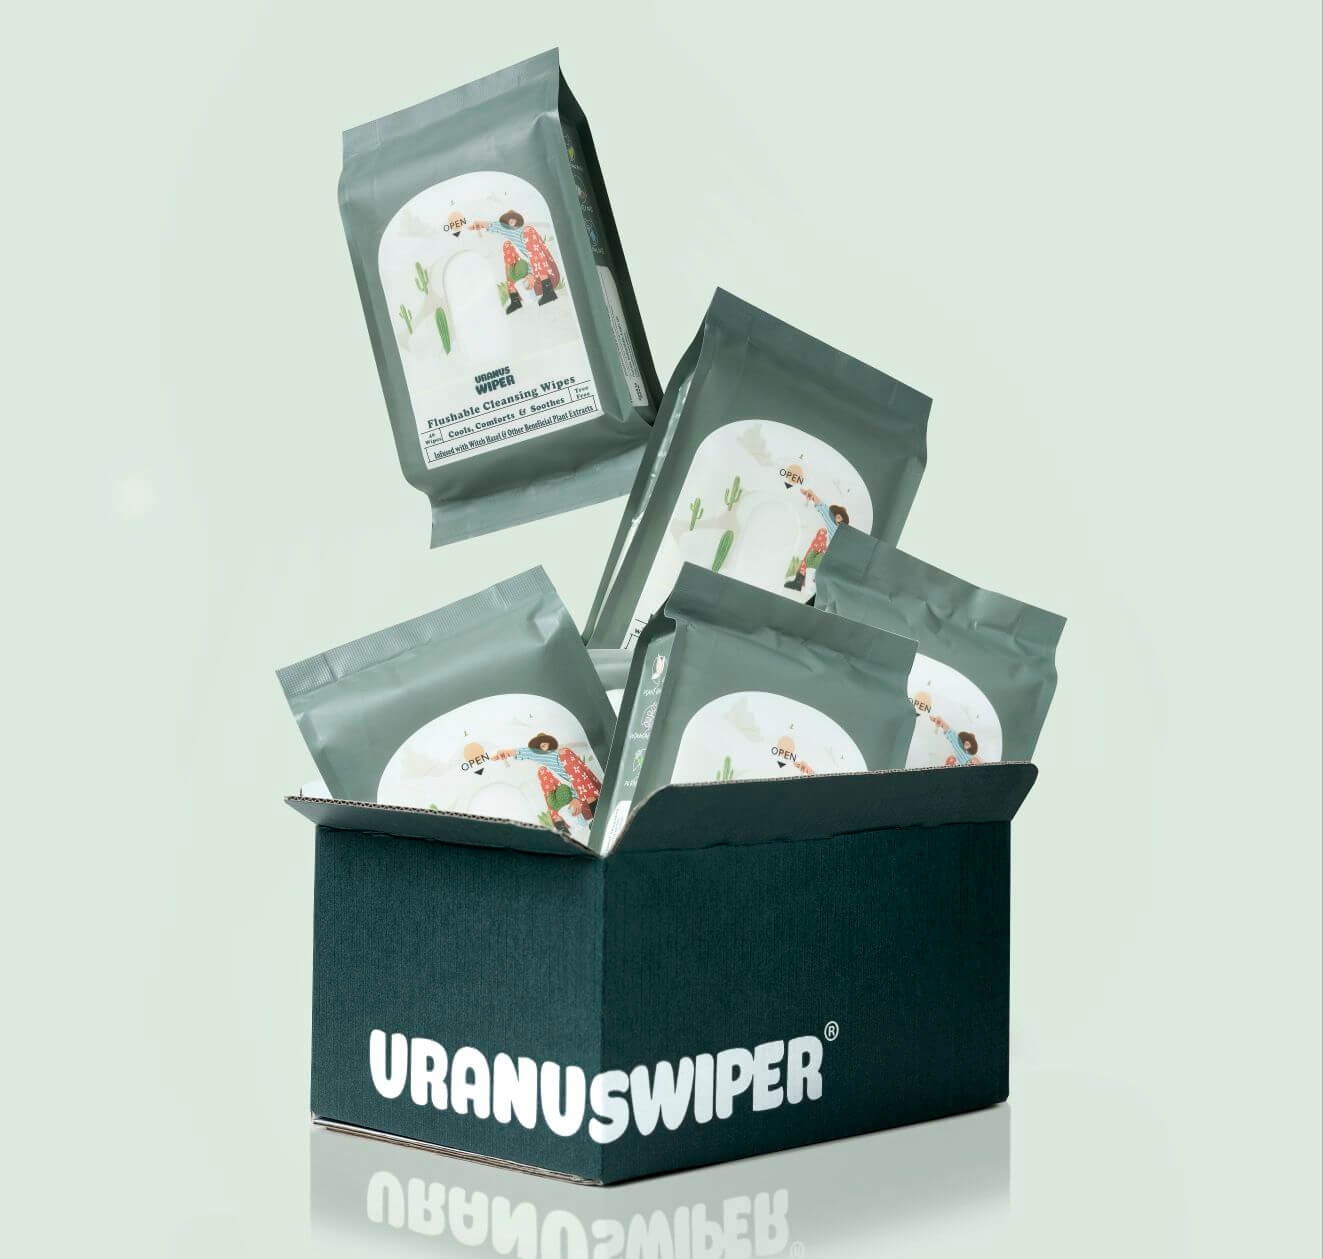 Uranus Wiper haemorrhoid wipes in biodegradeable delivery box